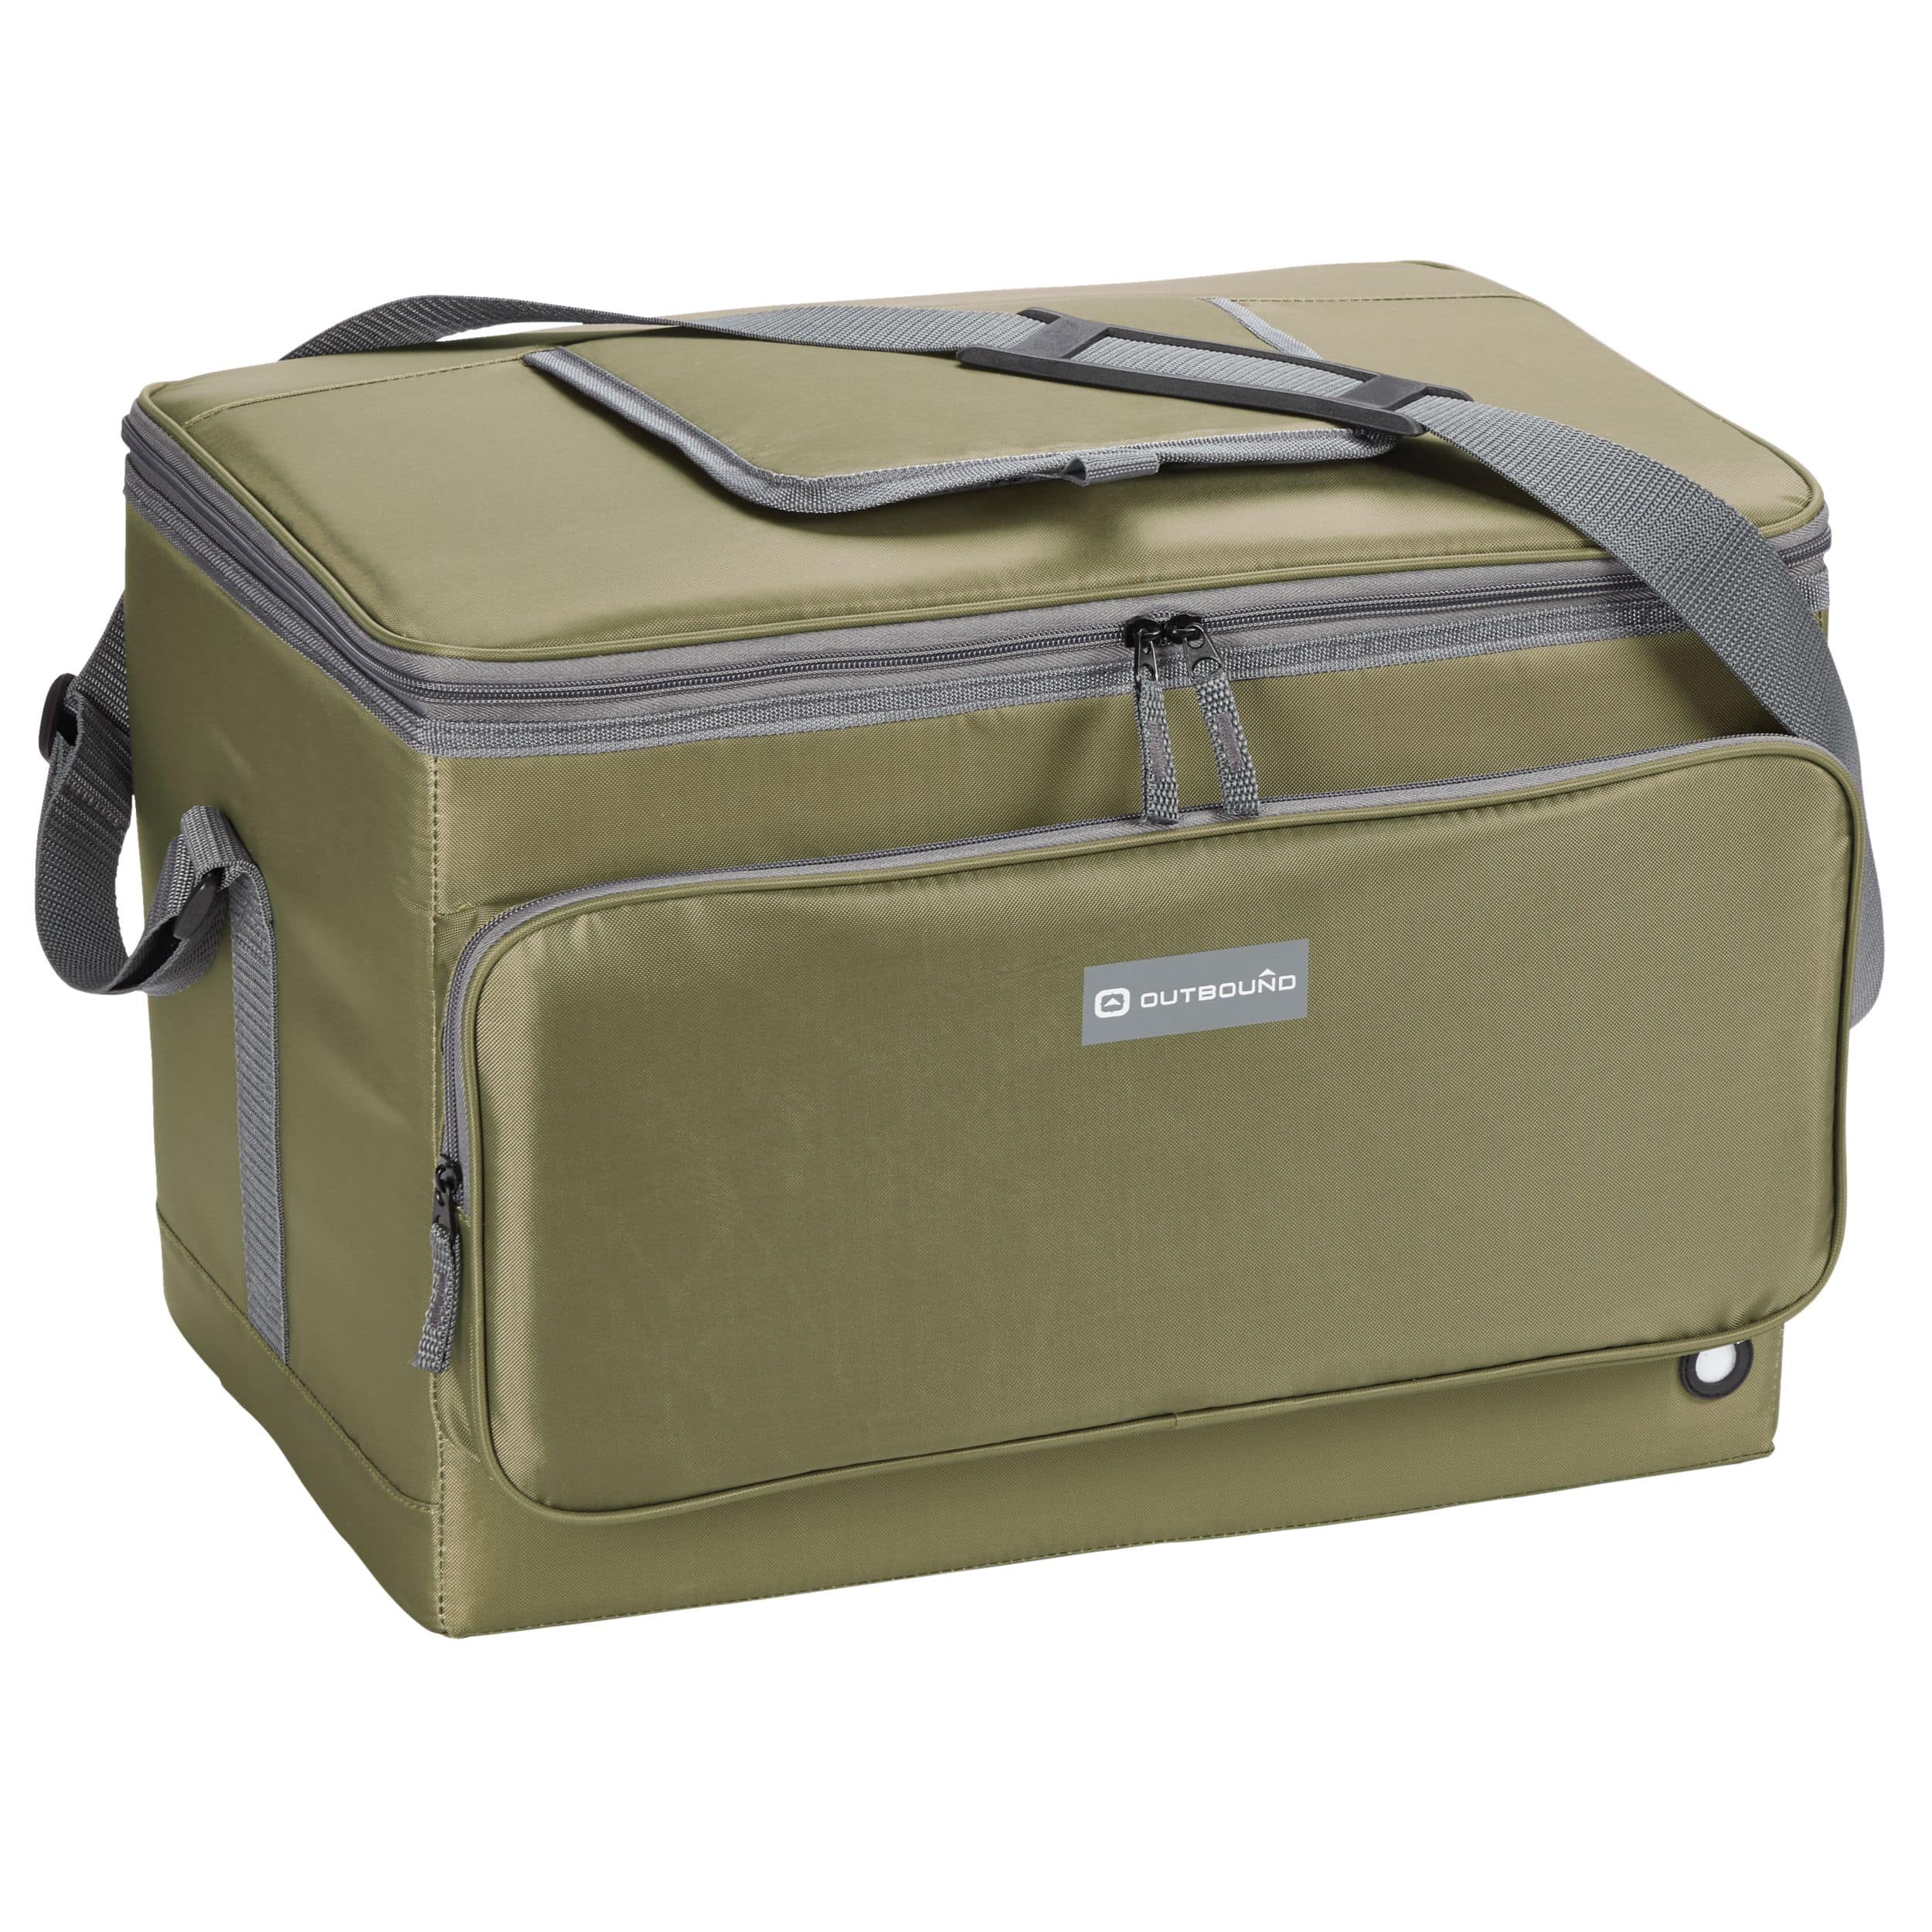 Outbound Large Collapsible Soft Cooler, 48 Can Capacity, 48-L, Olive/Green